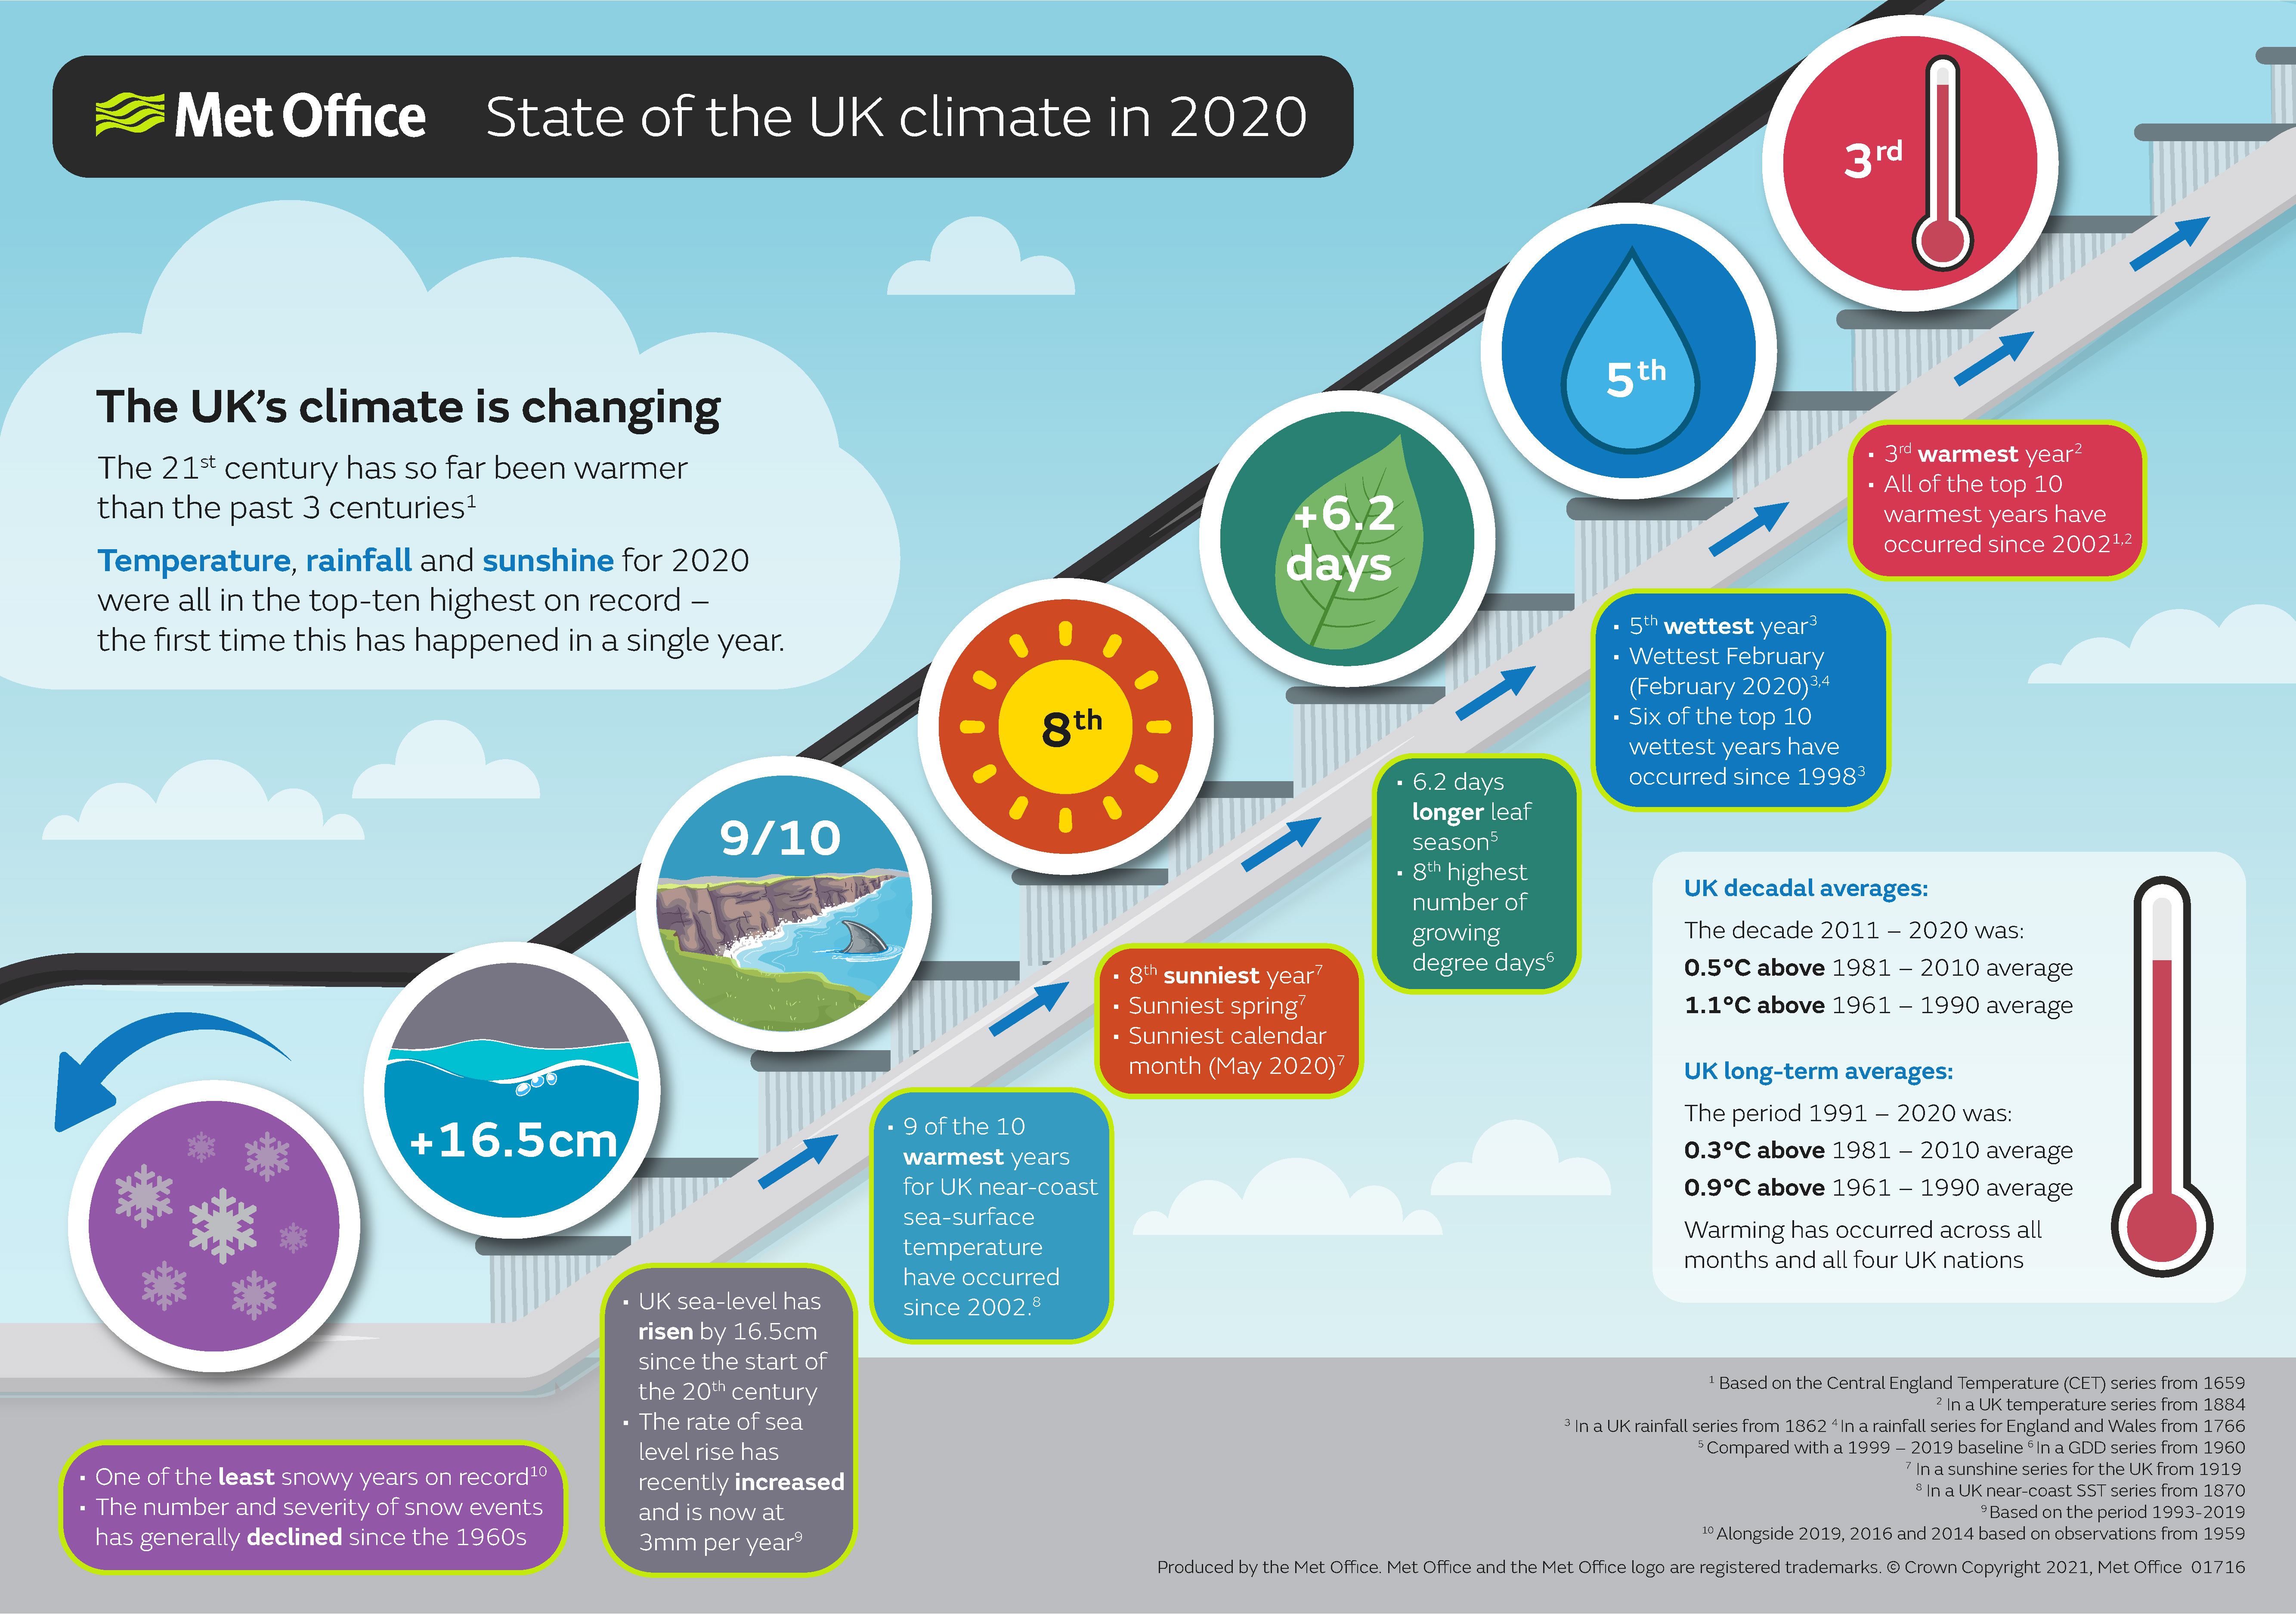 Met Office infographic showing the headlines from the report